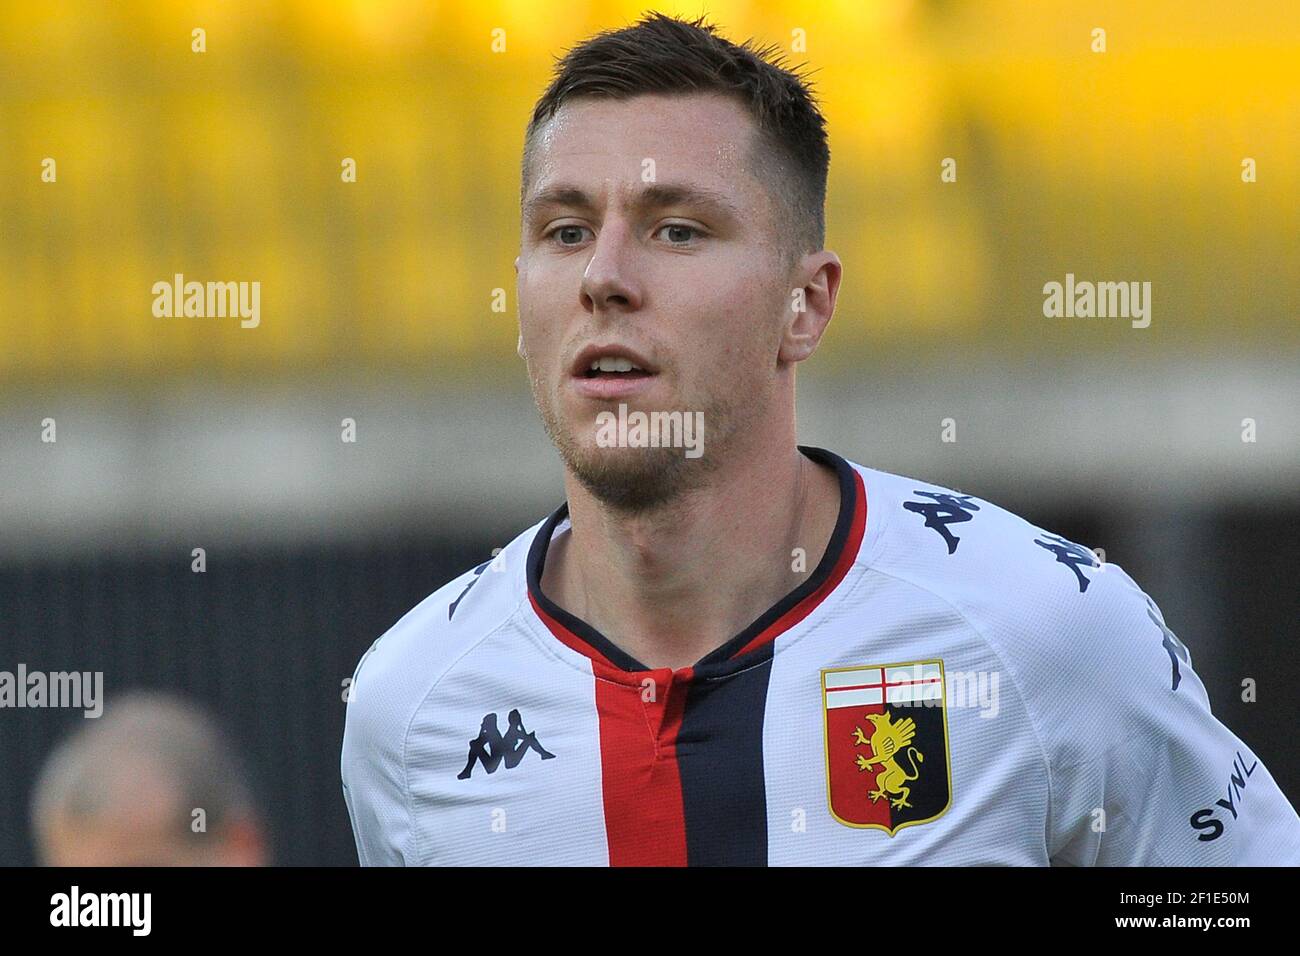 Lukas Lerager player of Genoa, during the match of the Italian football league Serie A between Benevento vs Genoa, final result 2-0, match played at t Stock Photo